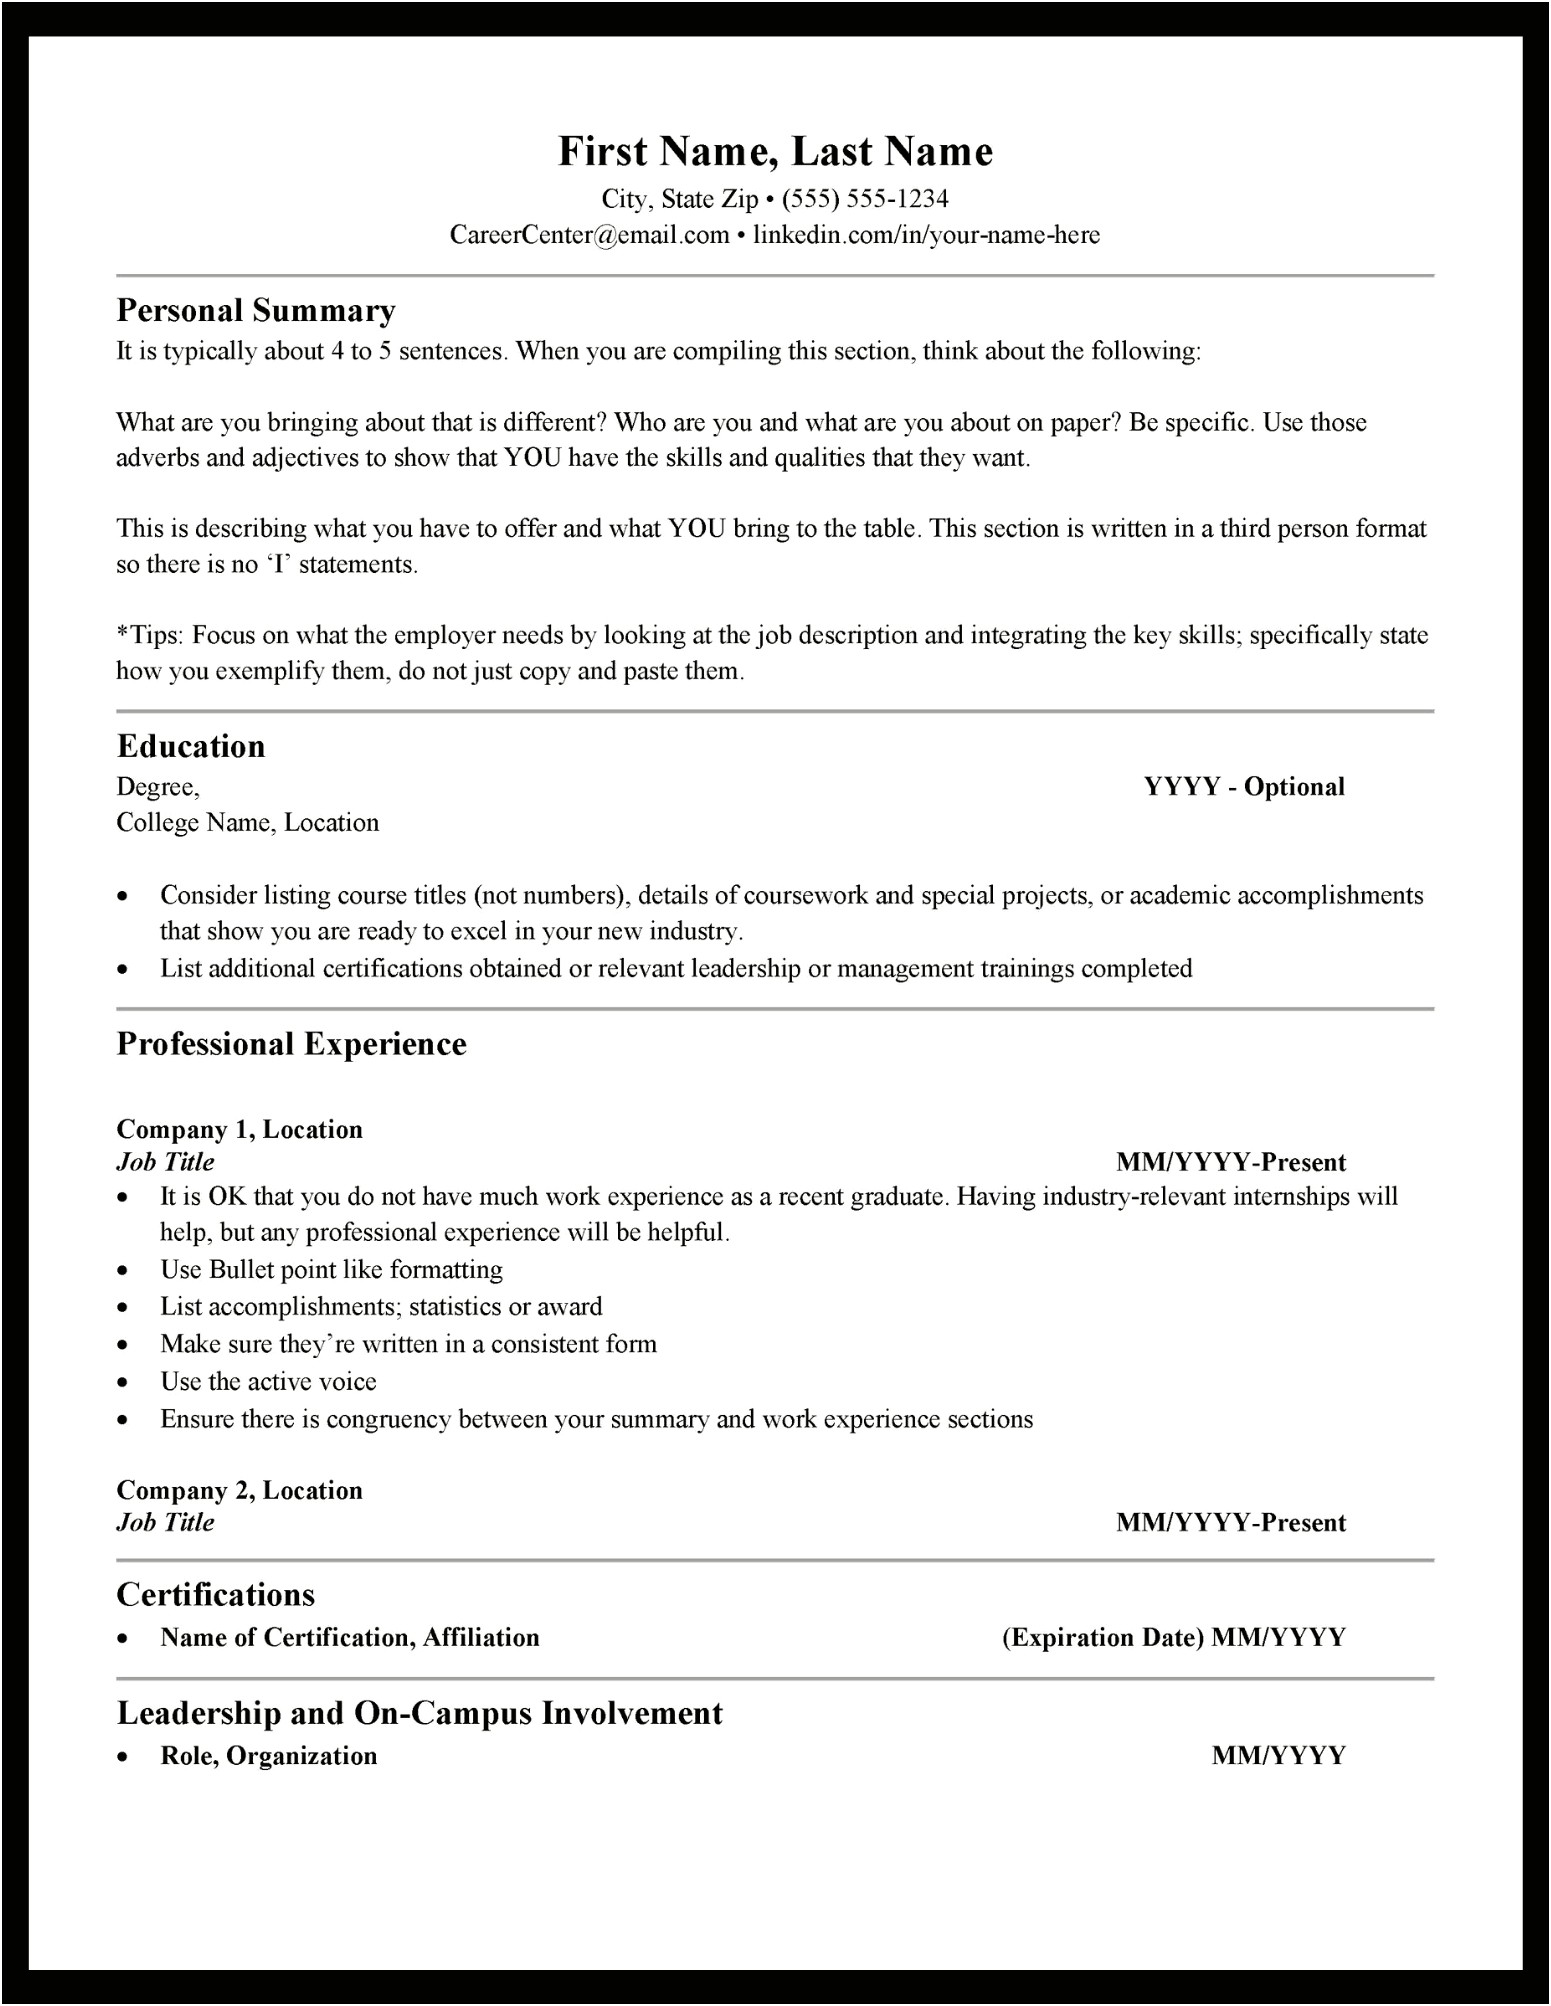 Not Putting Graduation Date On Resume